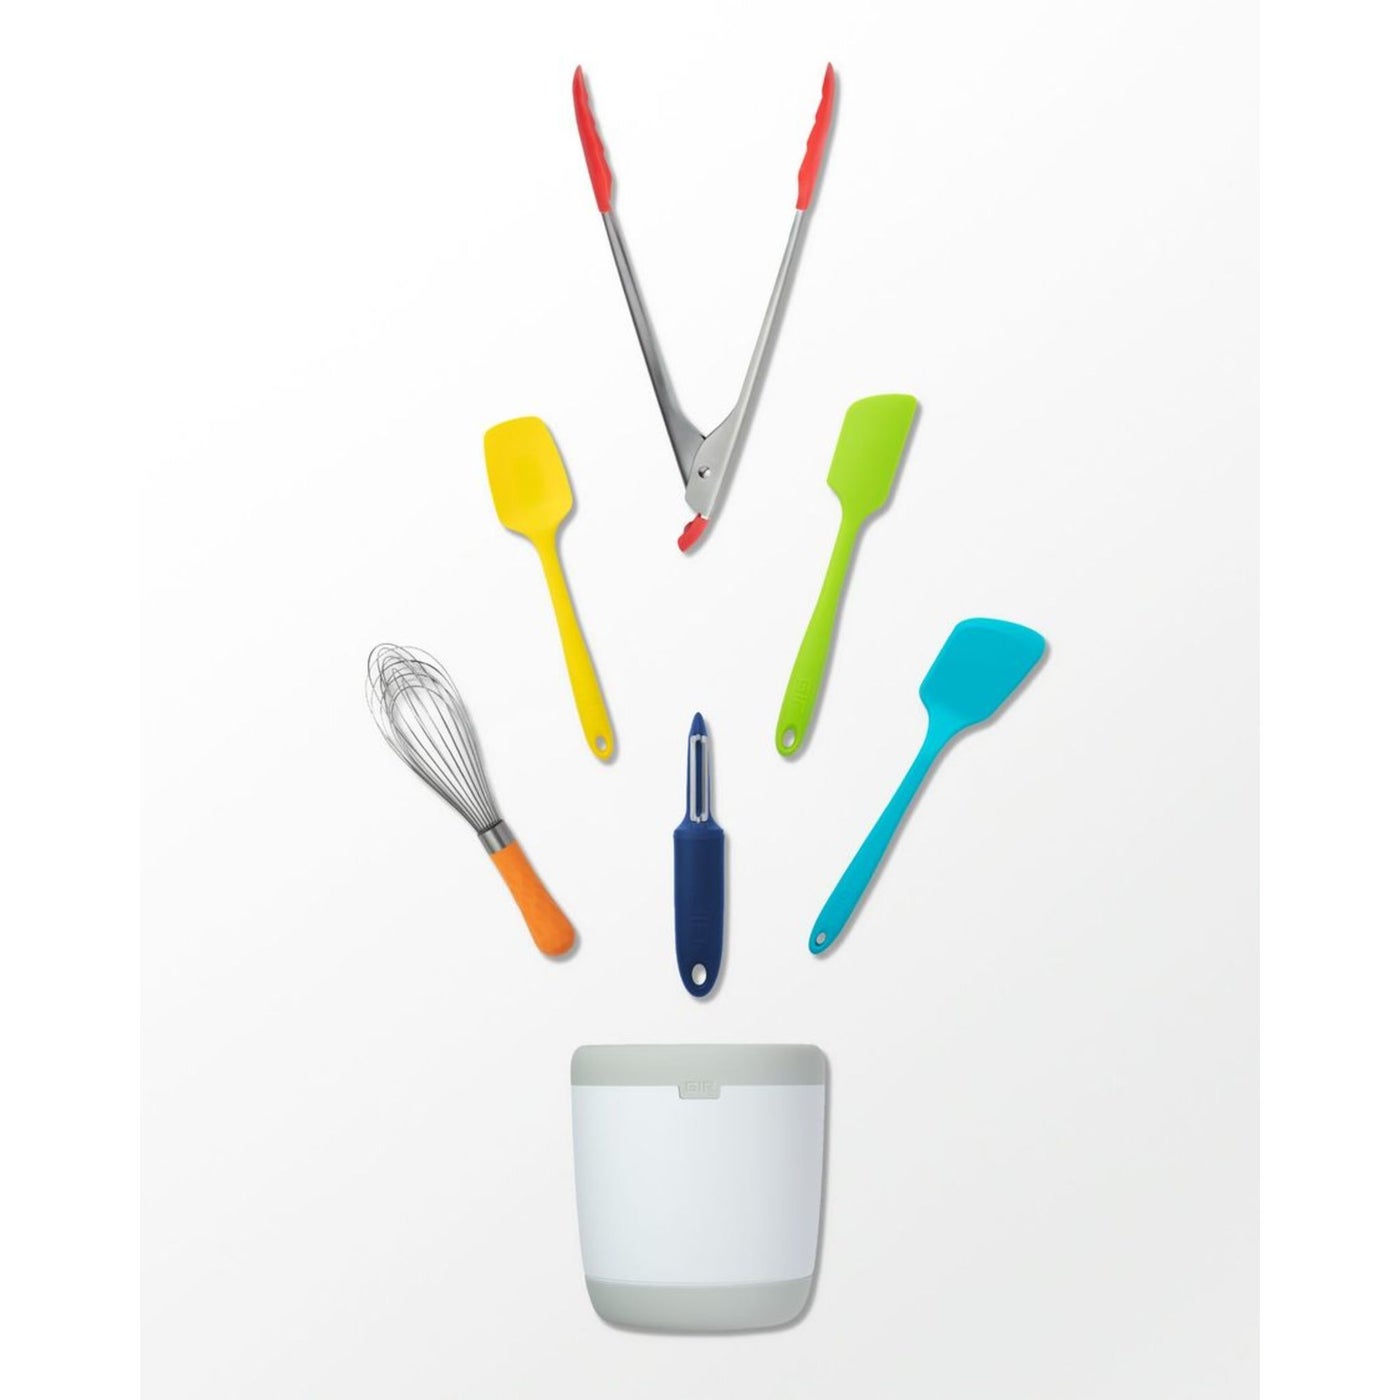 Get It Right The Ultimate Kitchen Tool Set - 7 Pieces